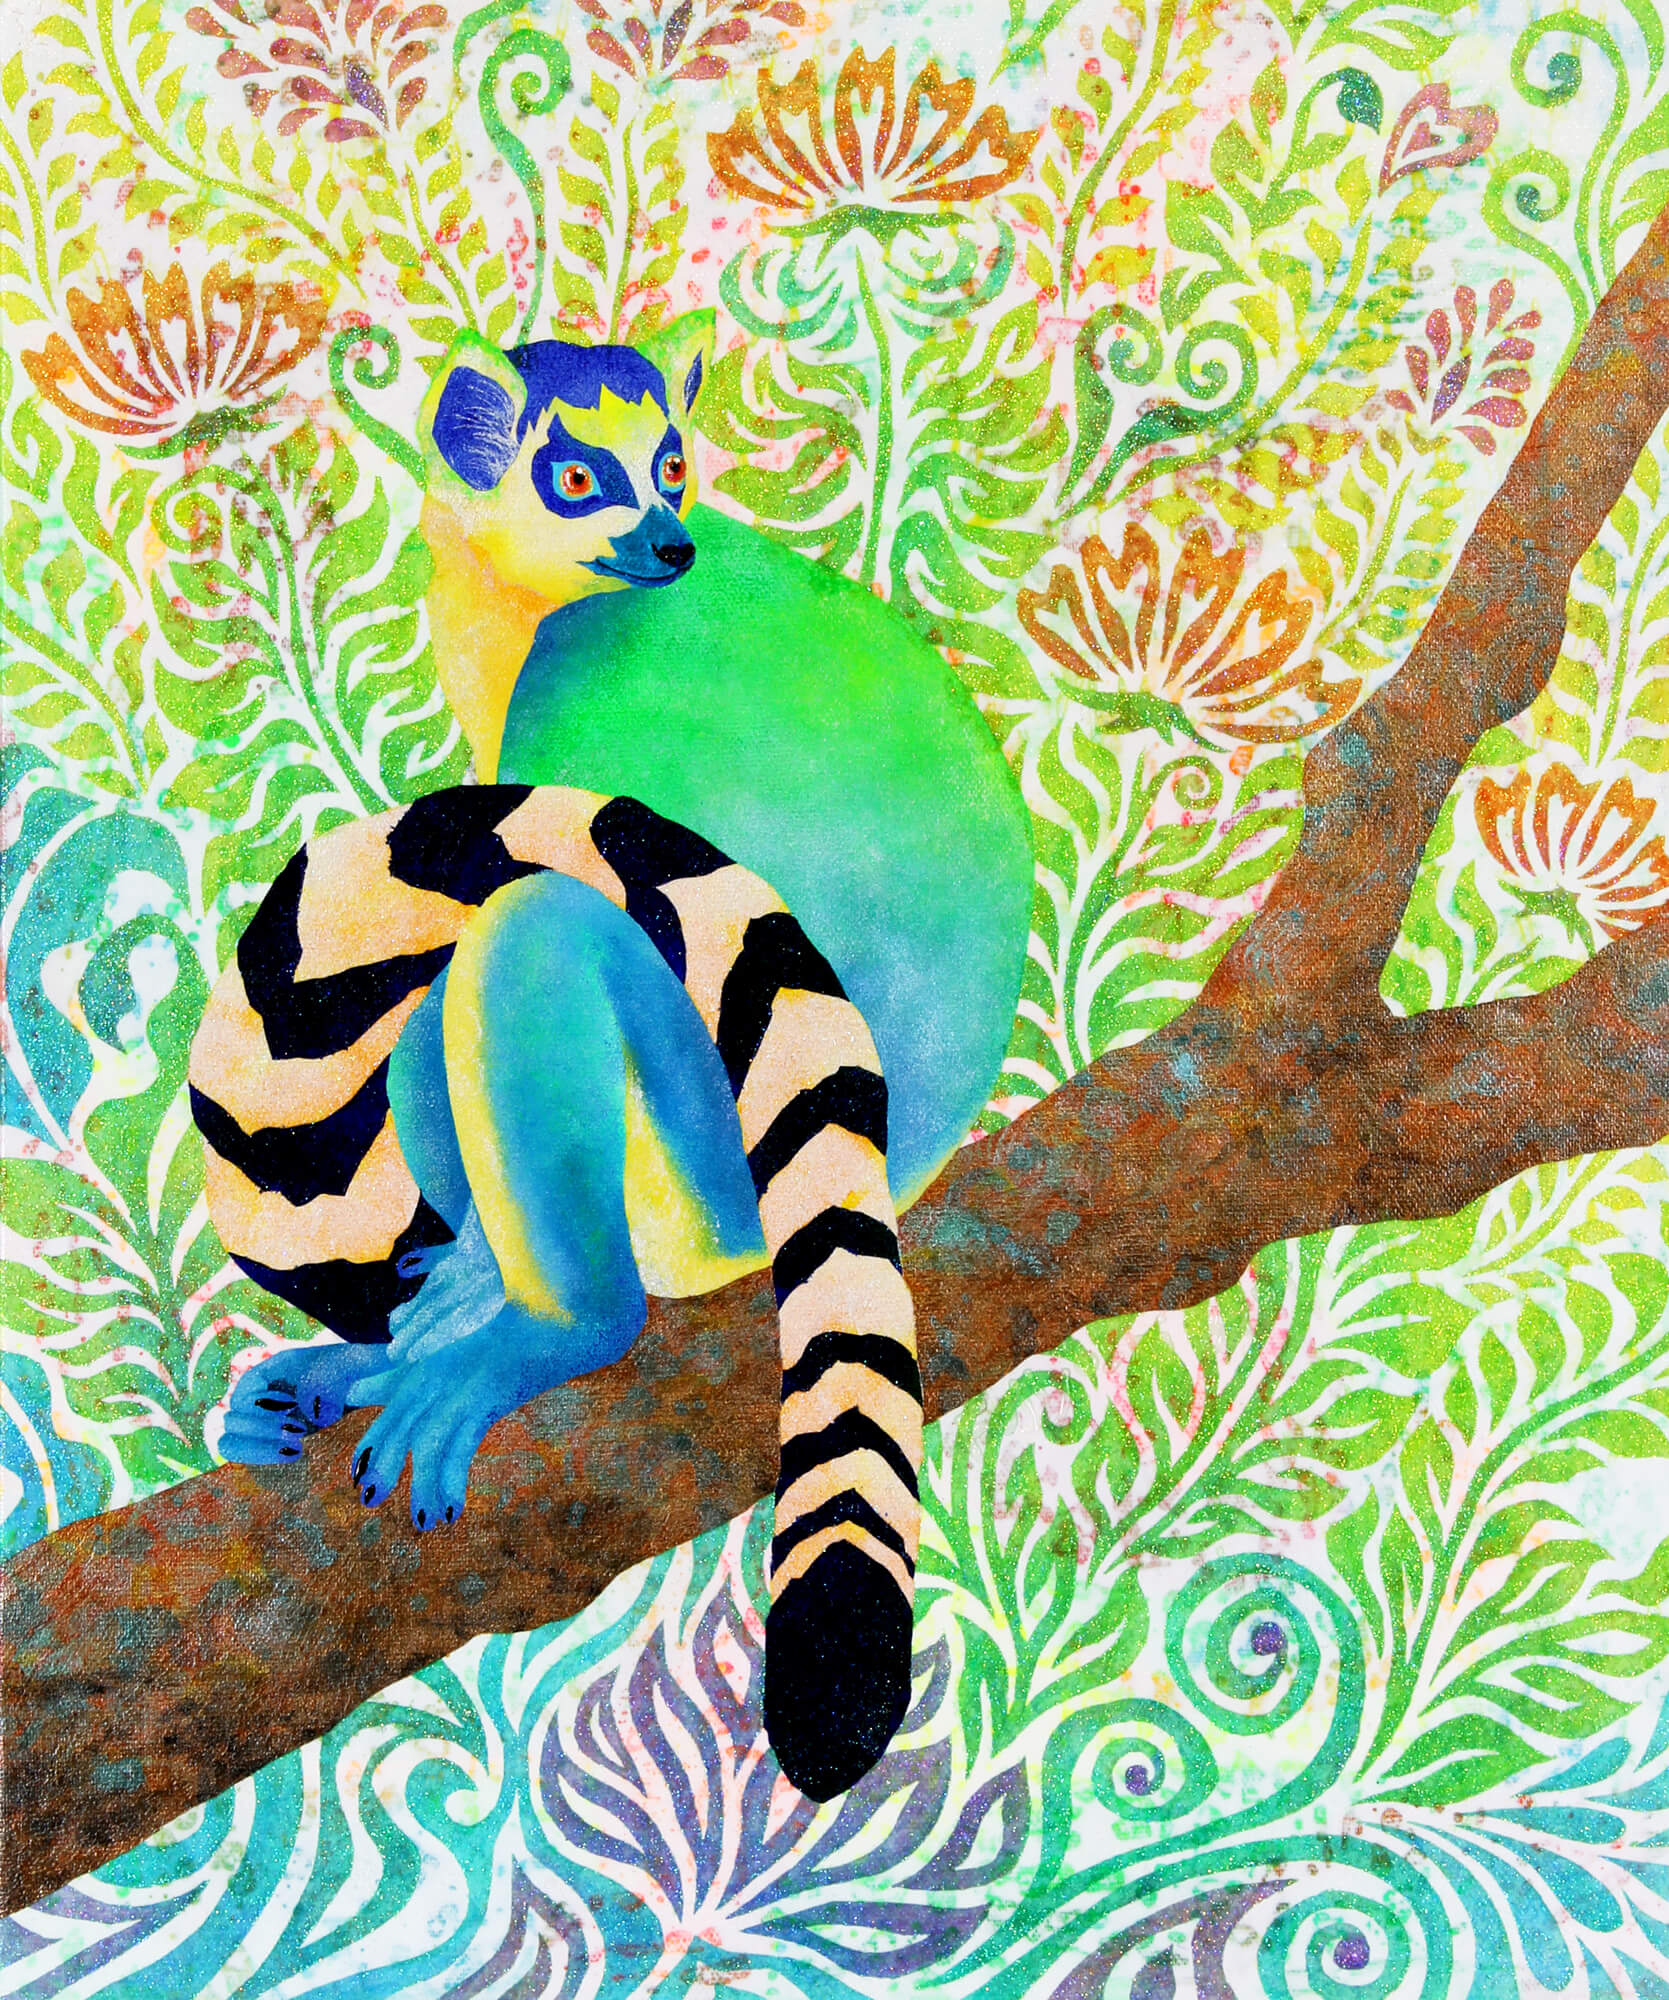 Blue Ring - tailed Lemur改行
Acrylic and glitter on canvas,455×380mm, 2017